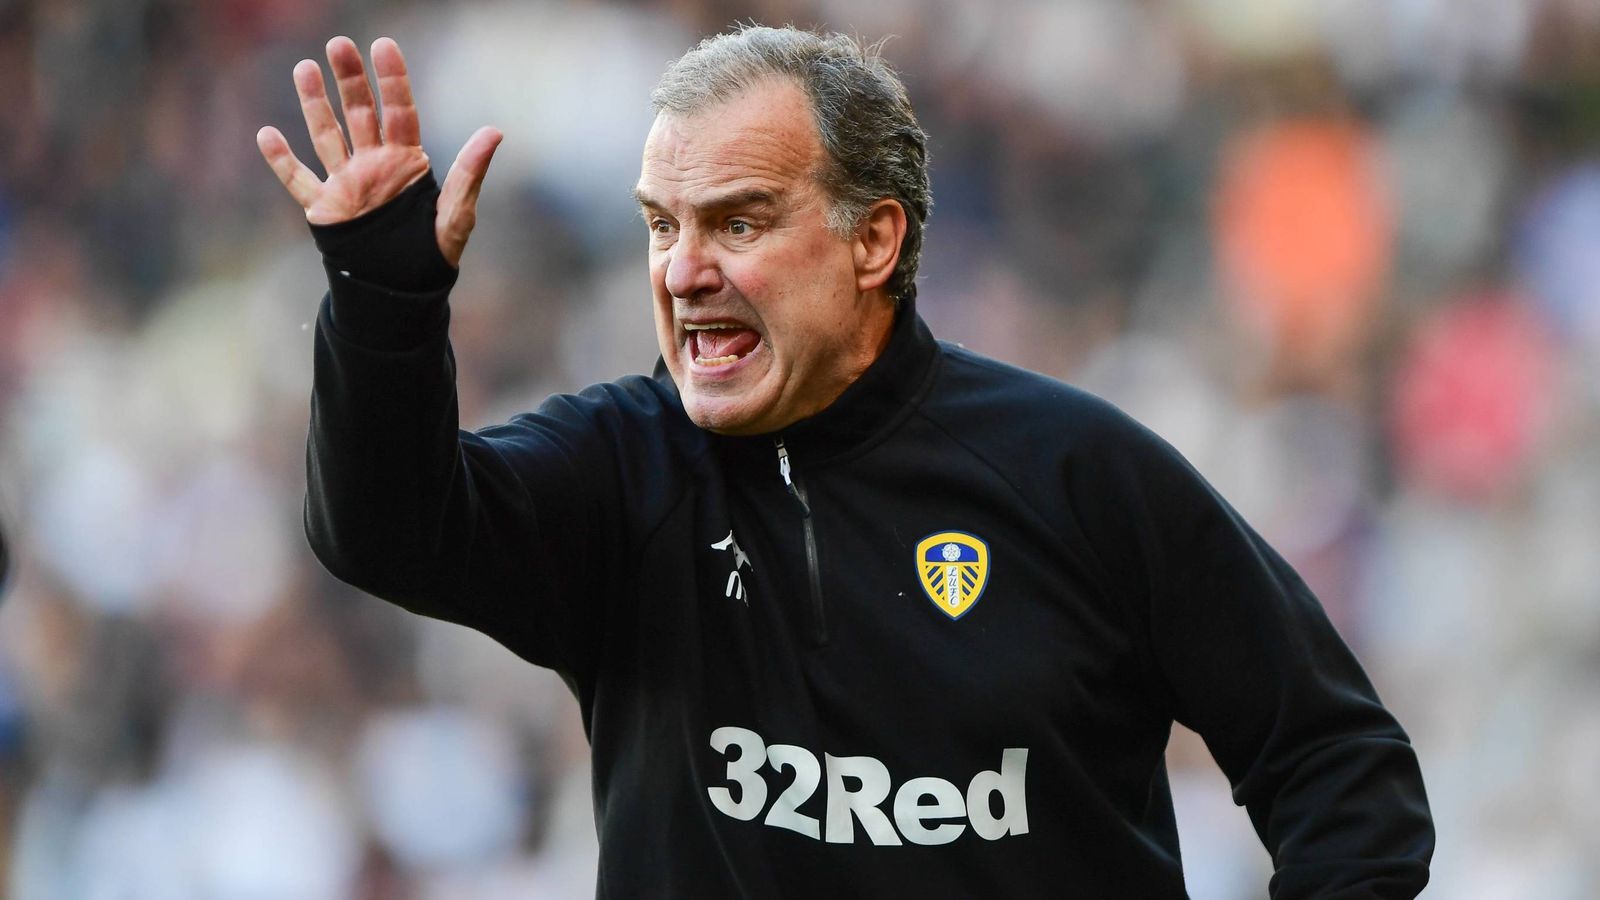 Bielsa Talks Modestly about Leeds Being Promoted to Premier League after 16 Years